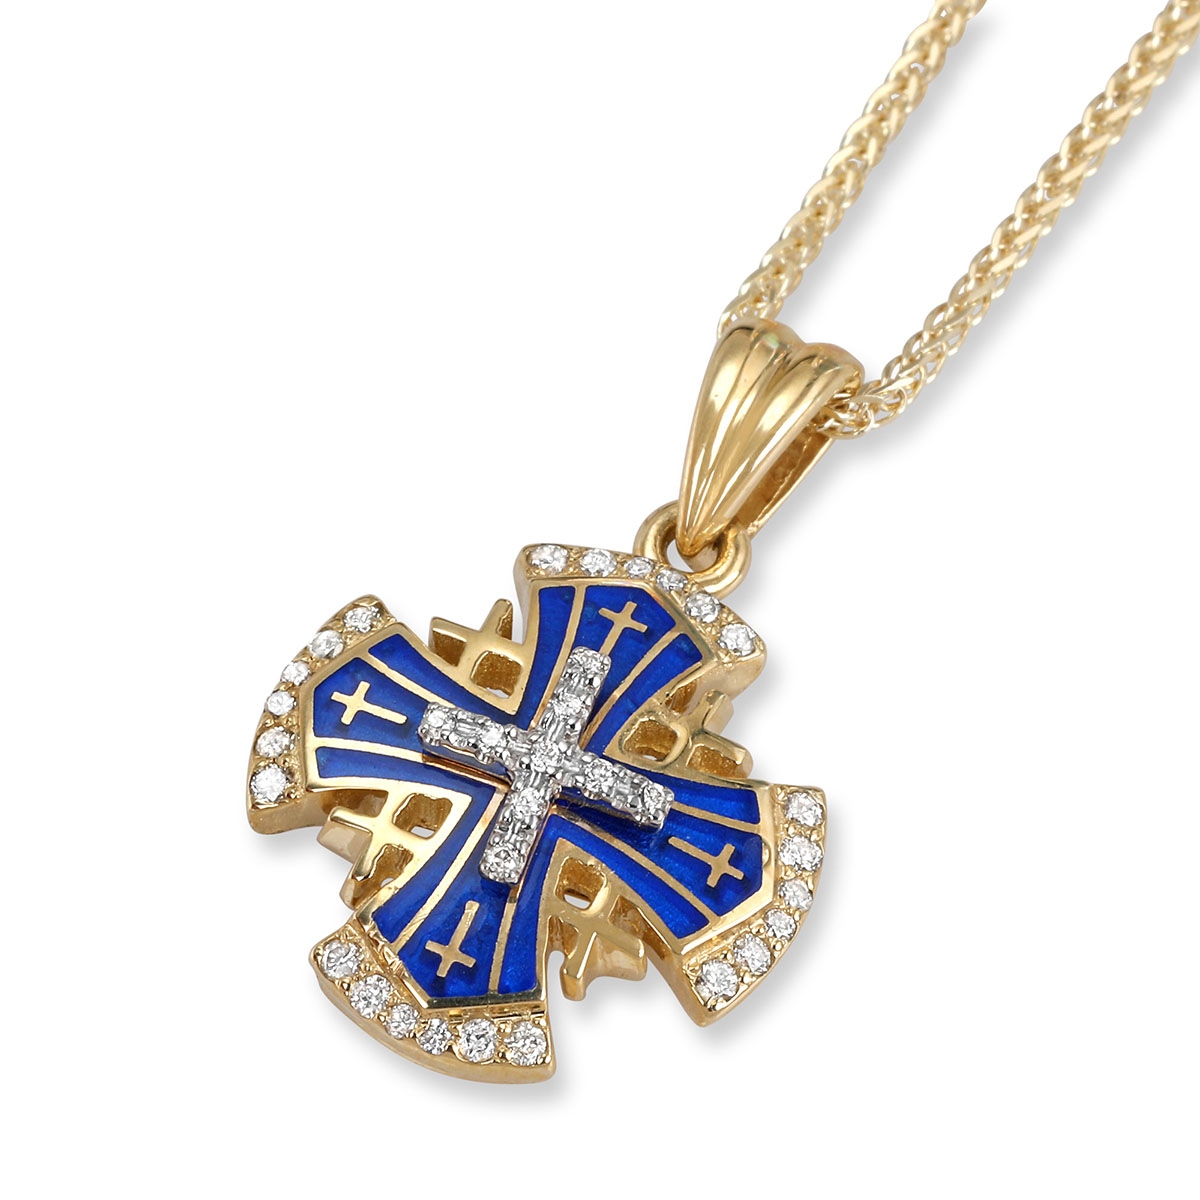 Anbinder 14K Yellow Gold and Blue Enamel Splayed Jerusalem Cross Pendant with Diamond Accented Borders - 1